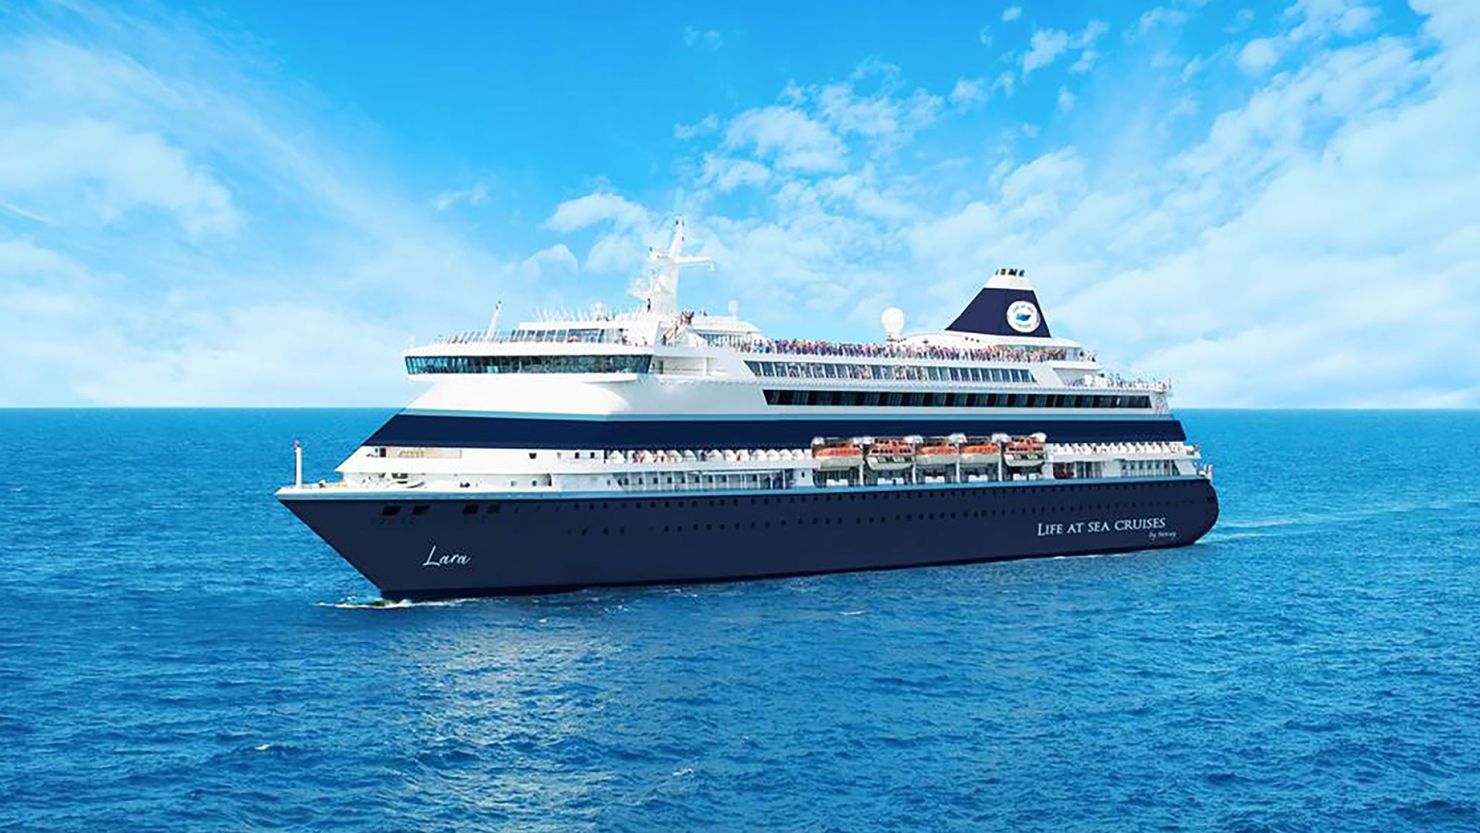 Embark On an Exciting Life at Sea Exploring the World in Luxury